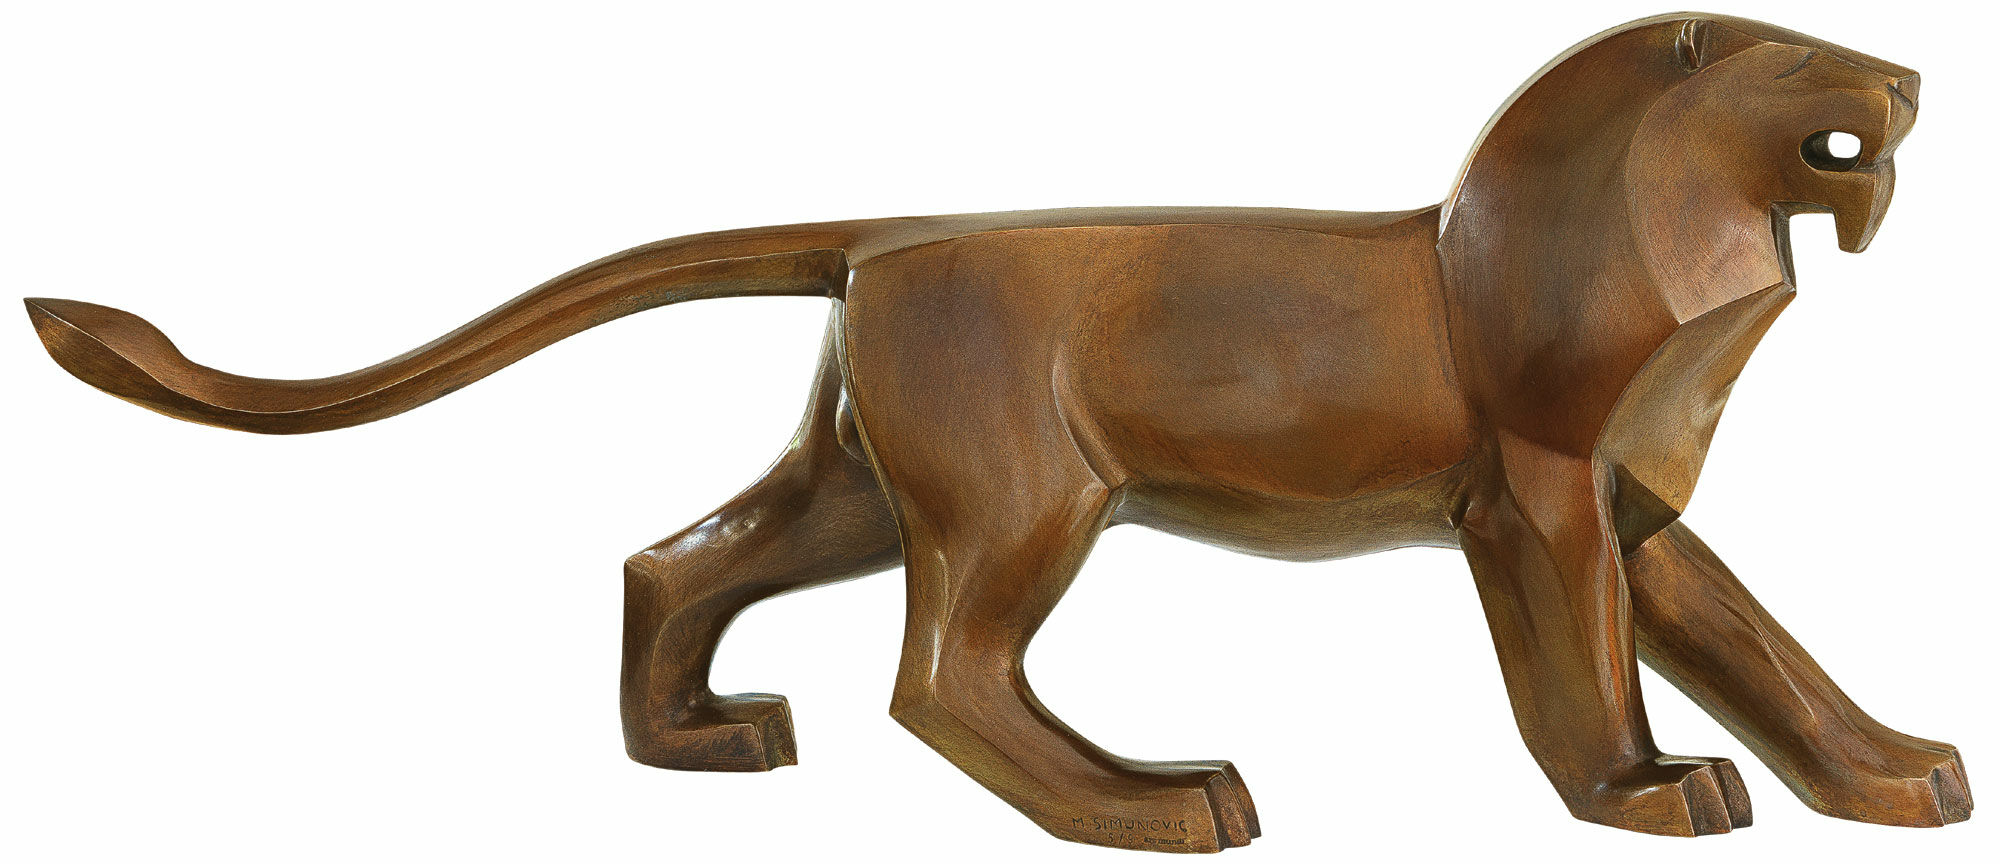 Sculpture "Strength (Lion)", bronze by SIME